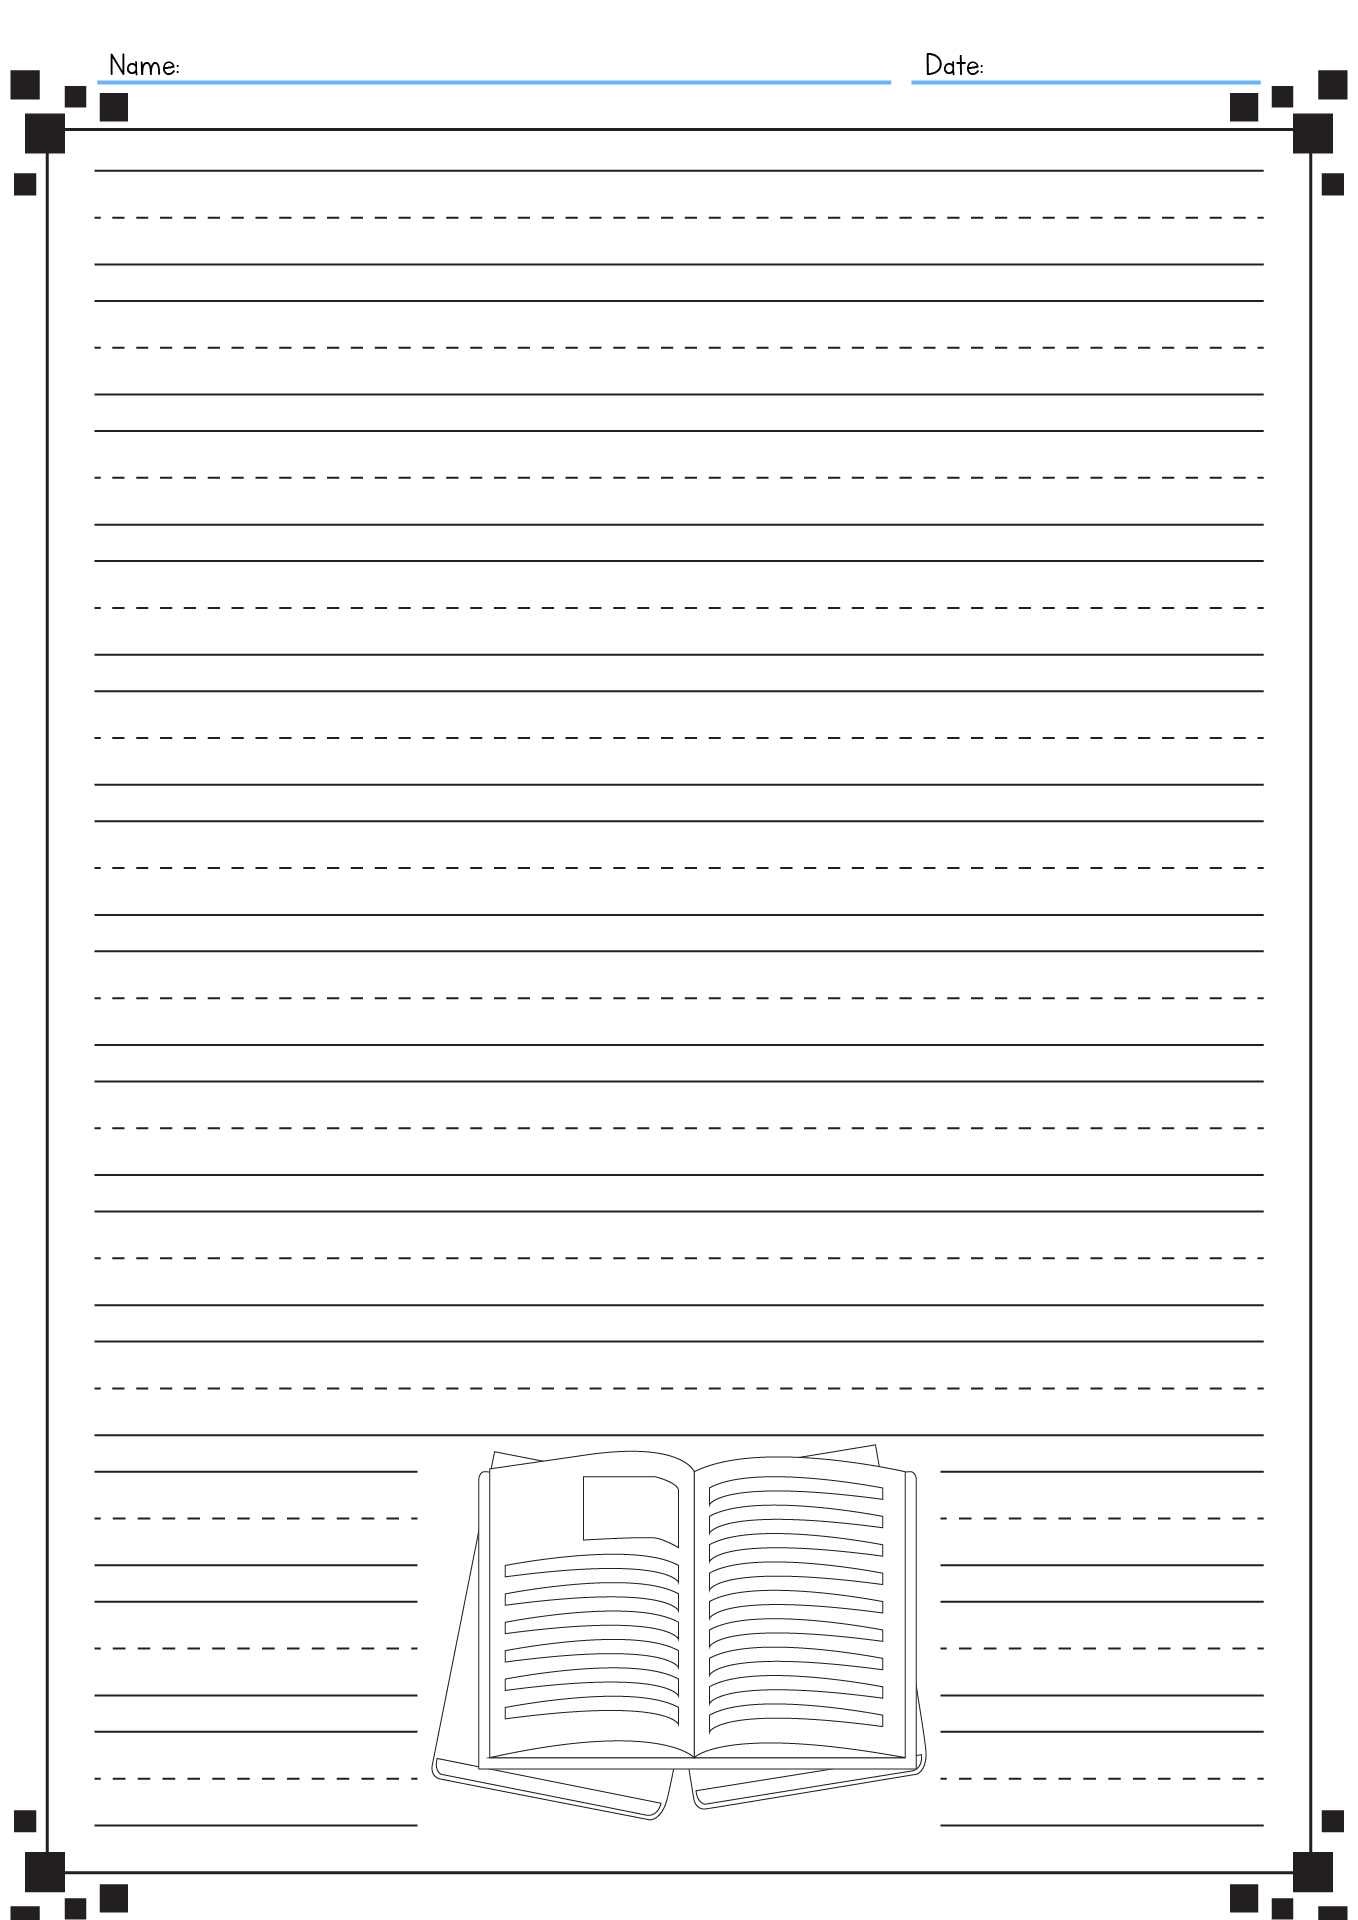 15-best-images-of-long-lined-paper-worksheets-4th-grade-essay-writing-printable-lined-writing